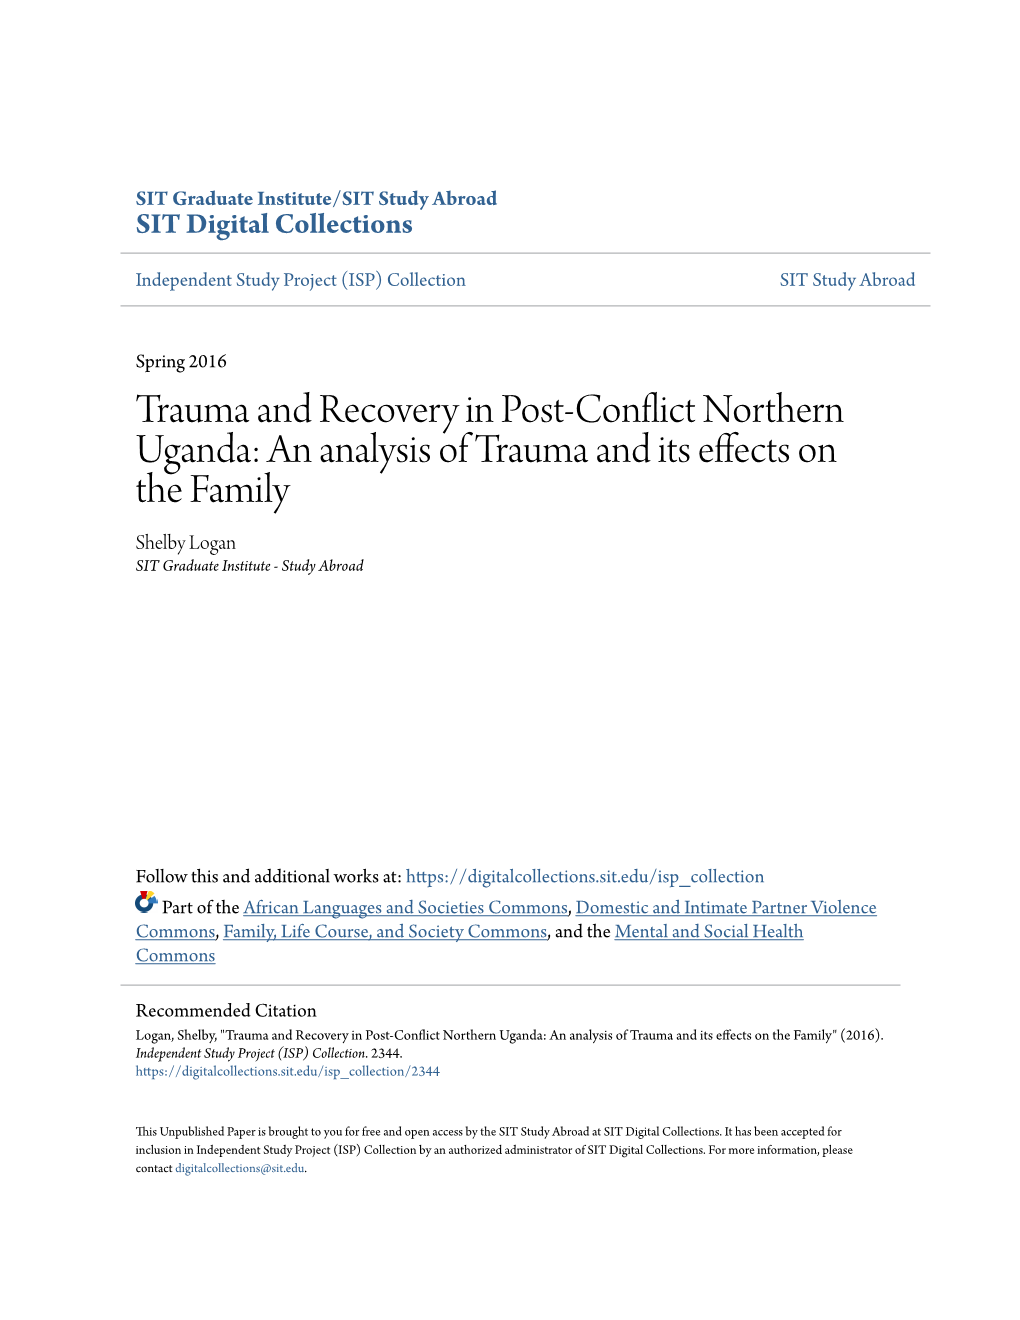 Trauma and Recovery in Post-Conflict Northern Uganda: an Analysis of Trauma and Its Effects on the Family Shelby Logan SIT Graduate Institute - Study Abroad